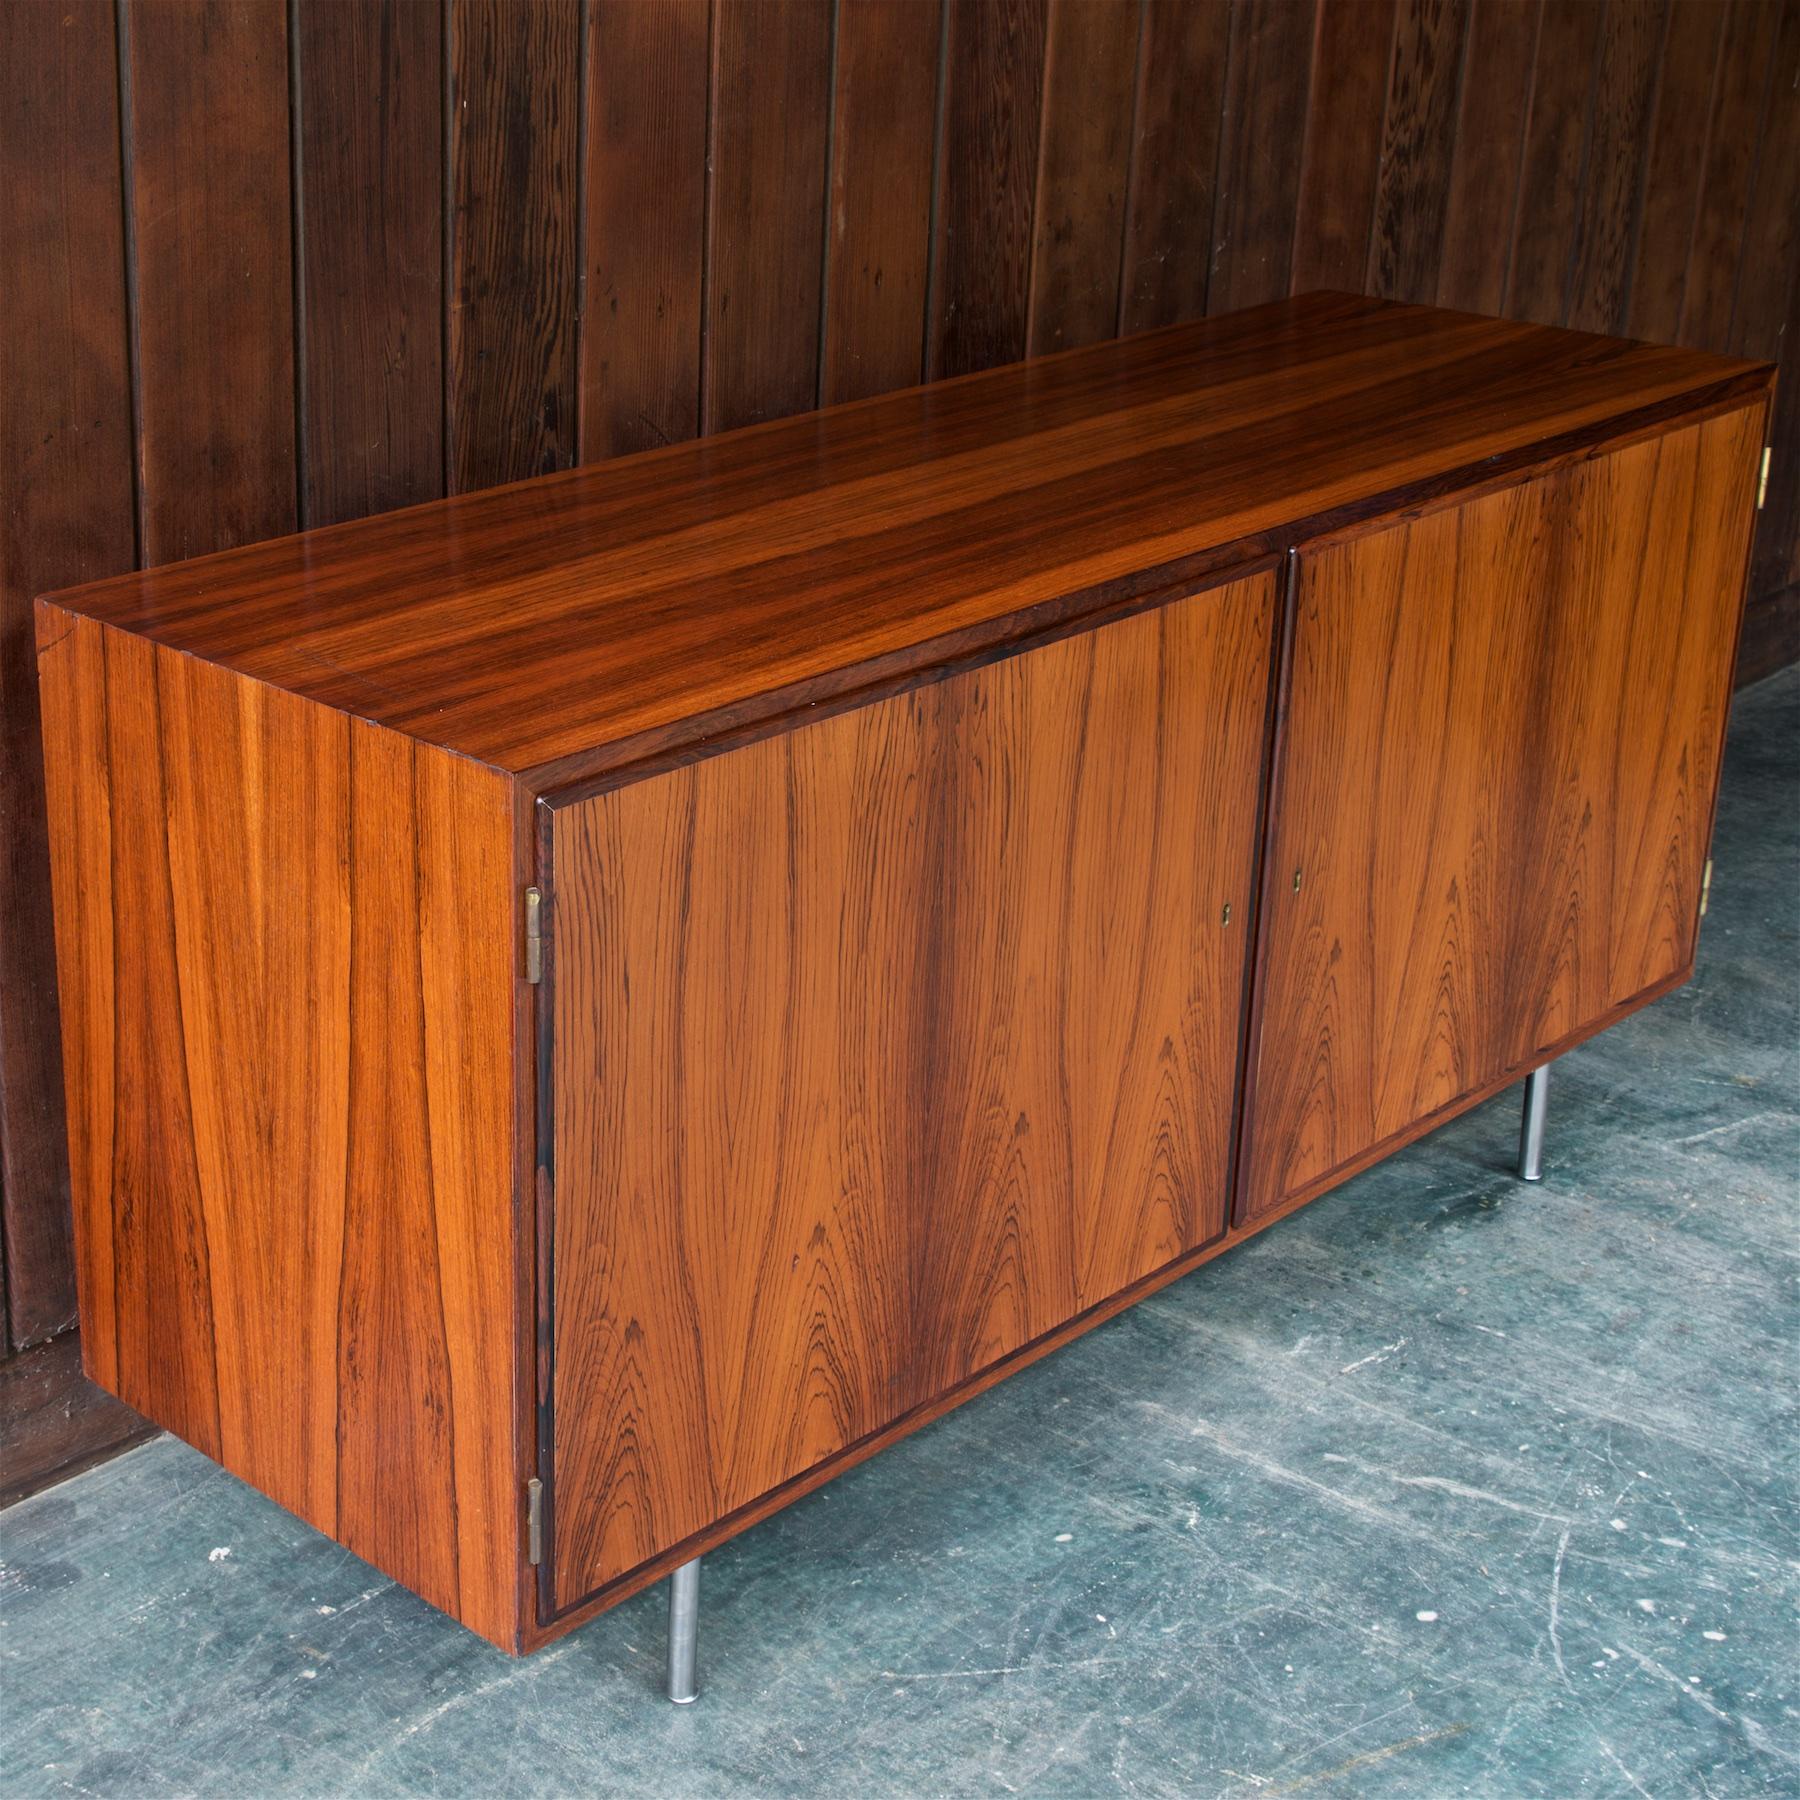 1960s Danish Credenza Midcentury Hundevad Rosewood Rustic Cabinmodern In Distressed Condition In Hyattsville, MD